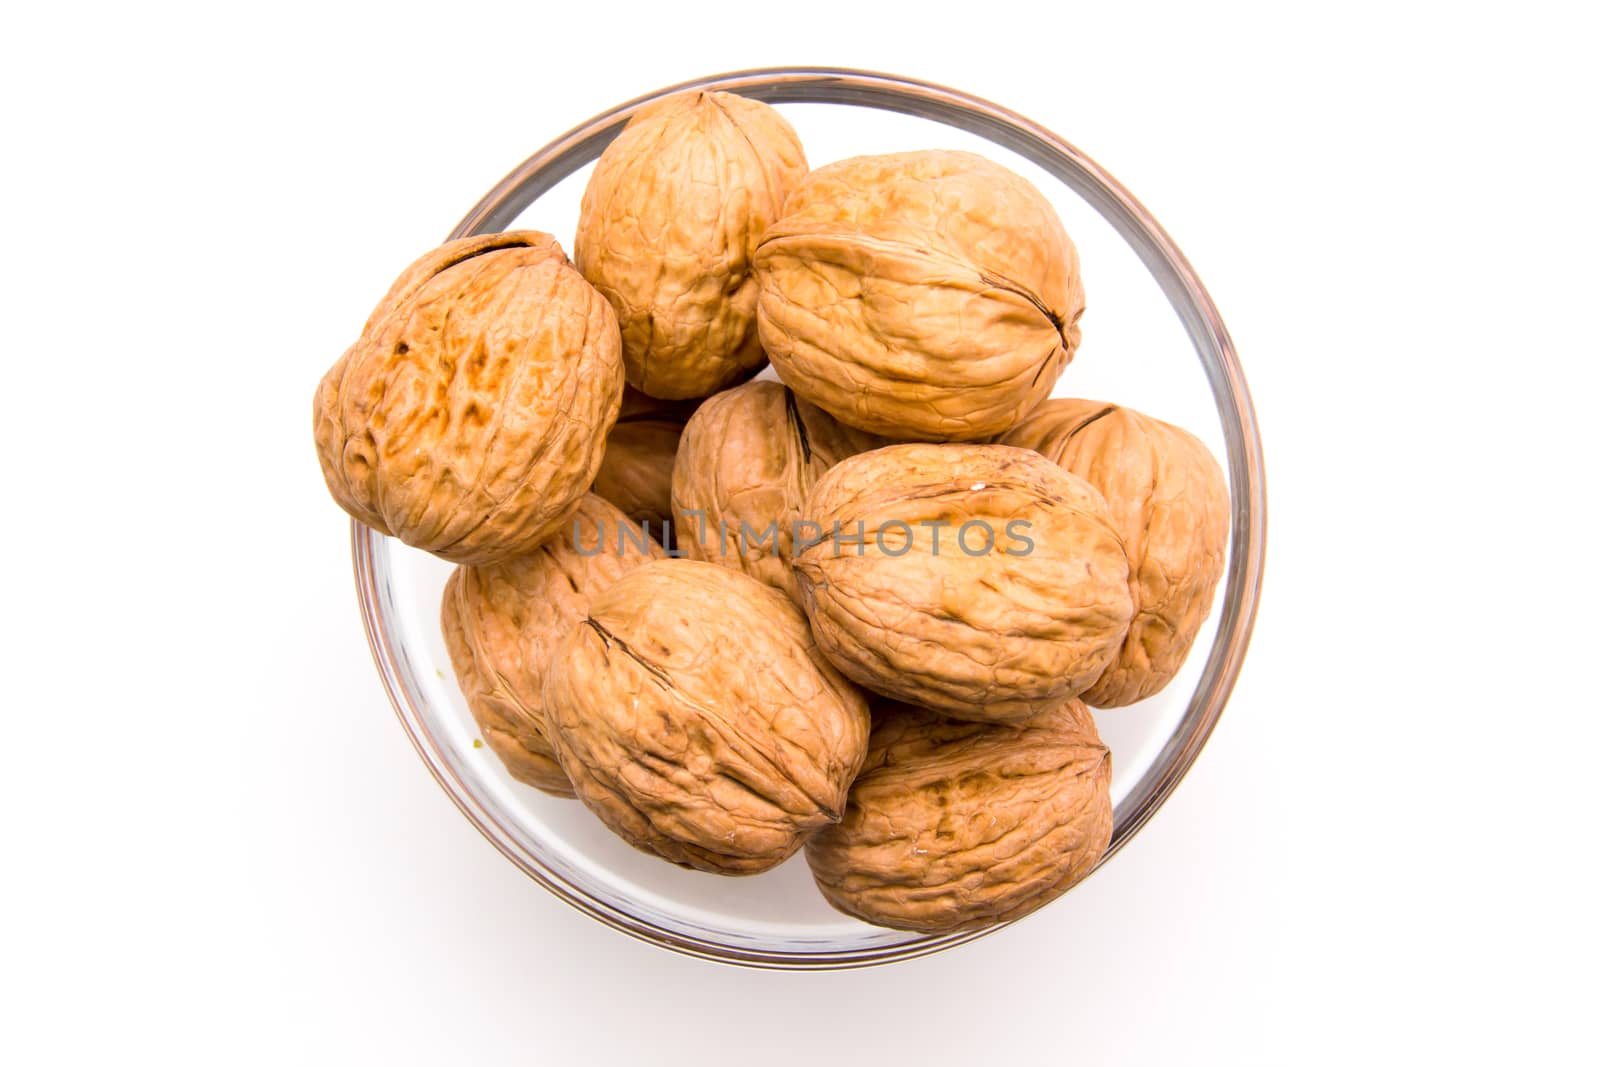 Nuts on bowl on white background seen from above